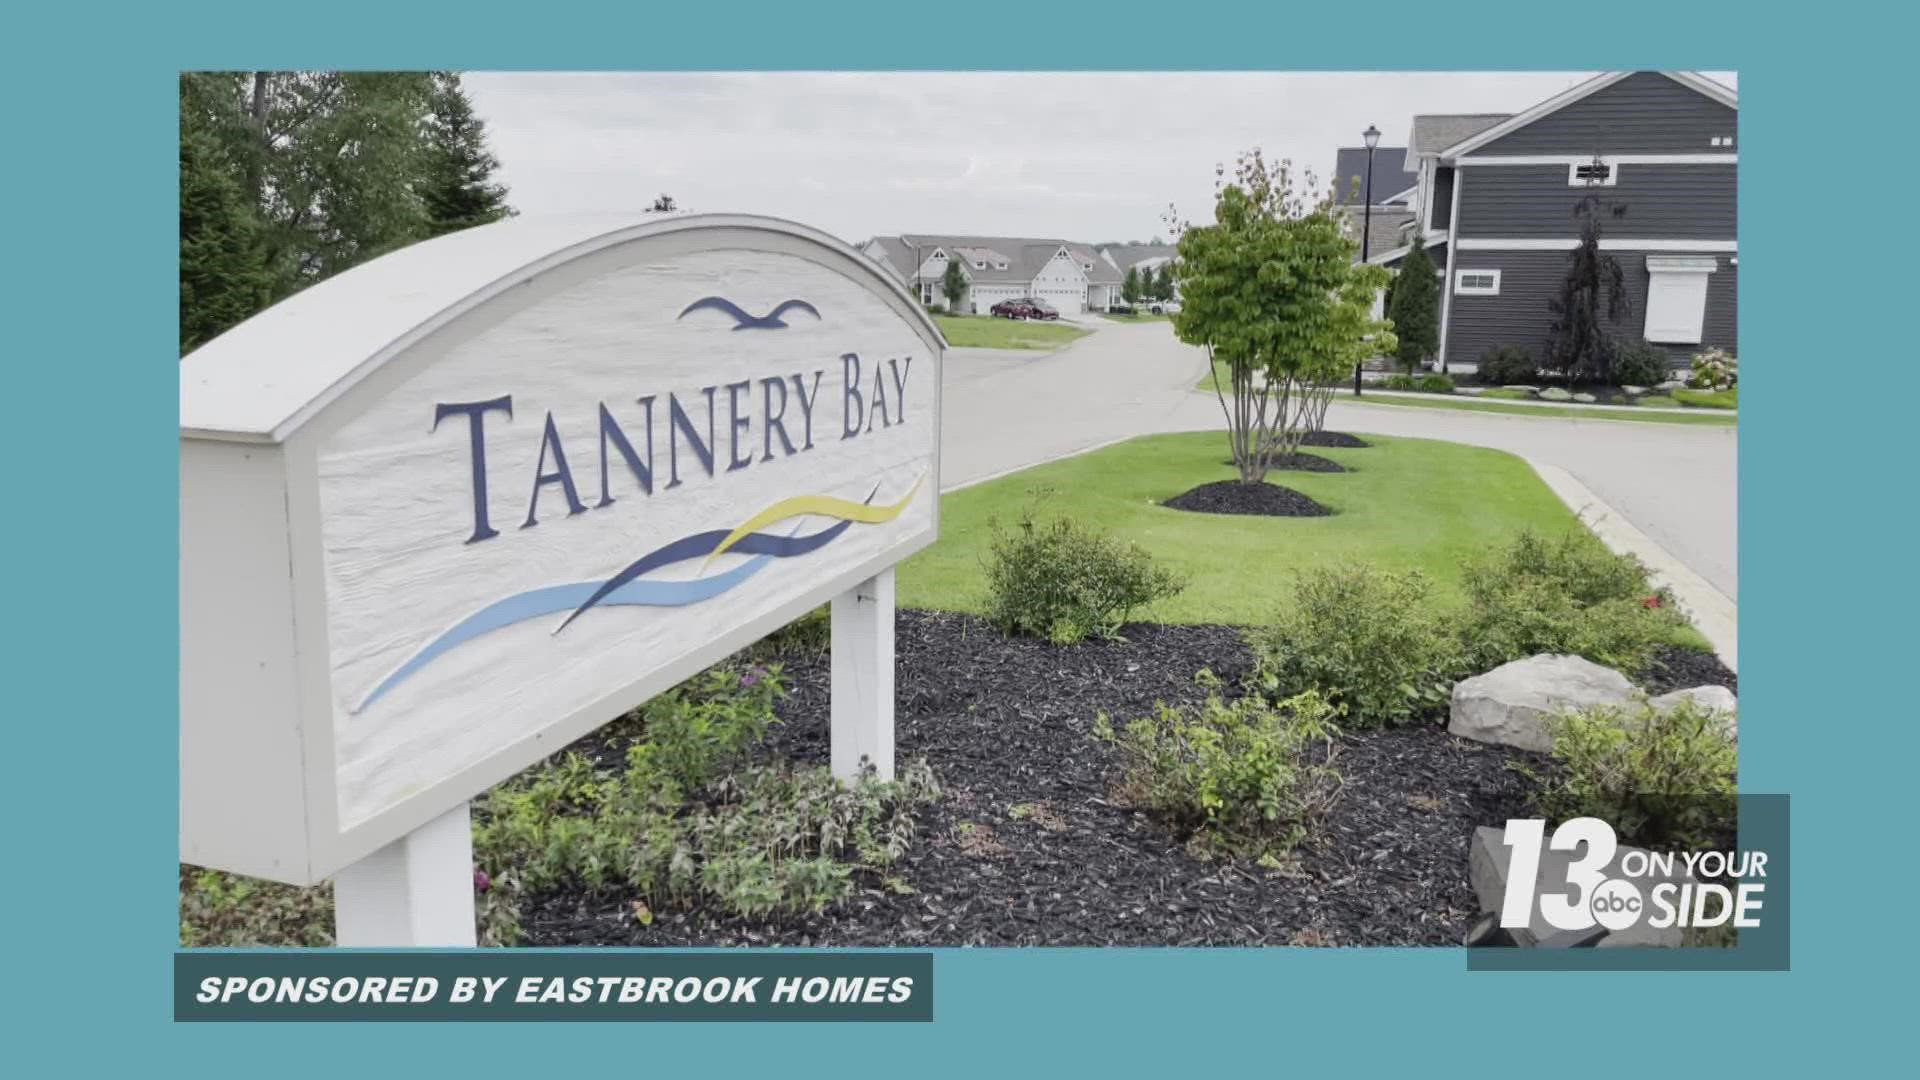 Eastbrook Homes offer modern amenities and high-end finishes, where buyers work with a team to make design decisions and create the home of their dreams.